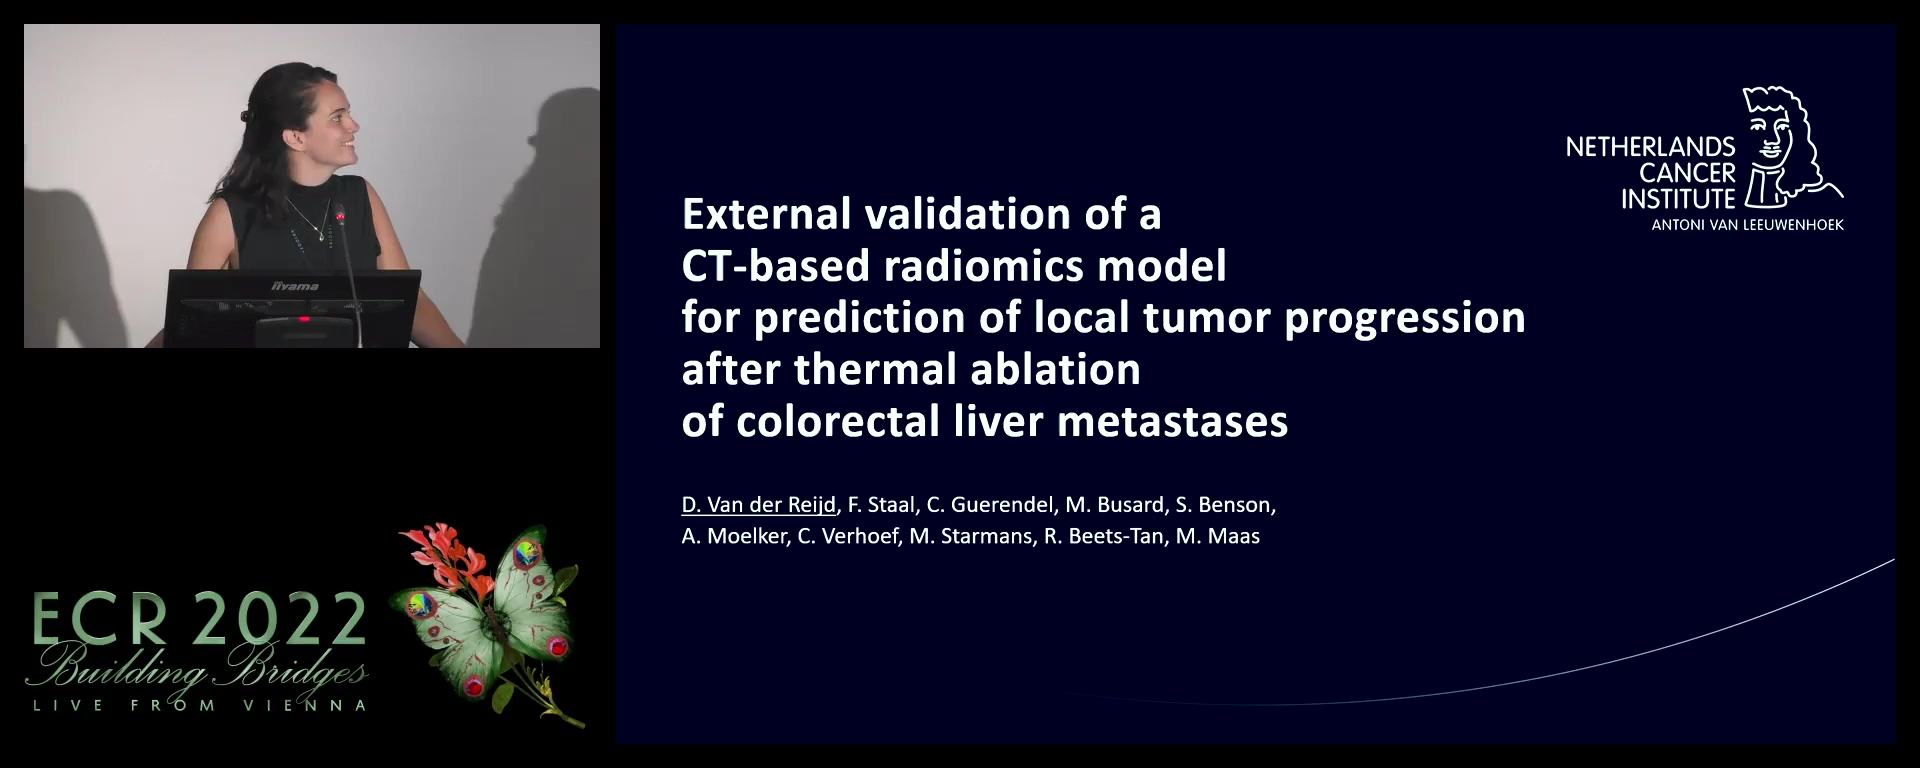 External validation of A CT-based radiomics model for prediction of local tumour progression after thermal ablation In colorectal liver metastases